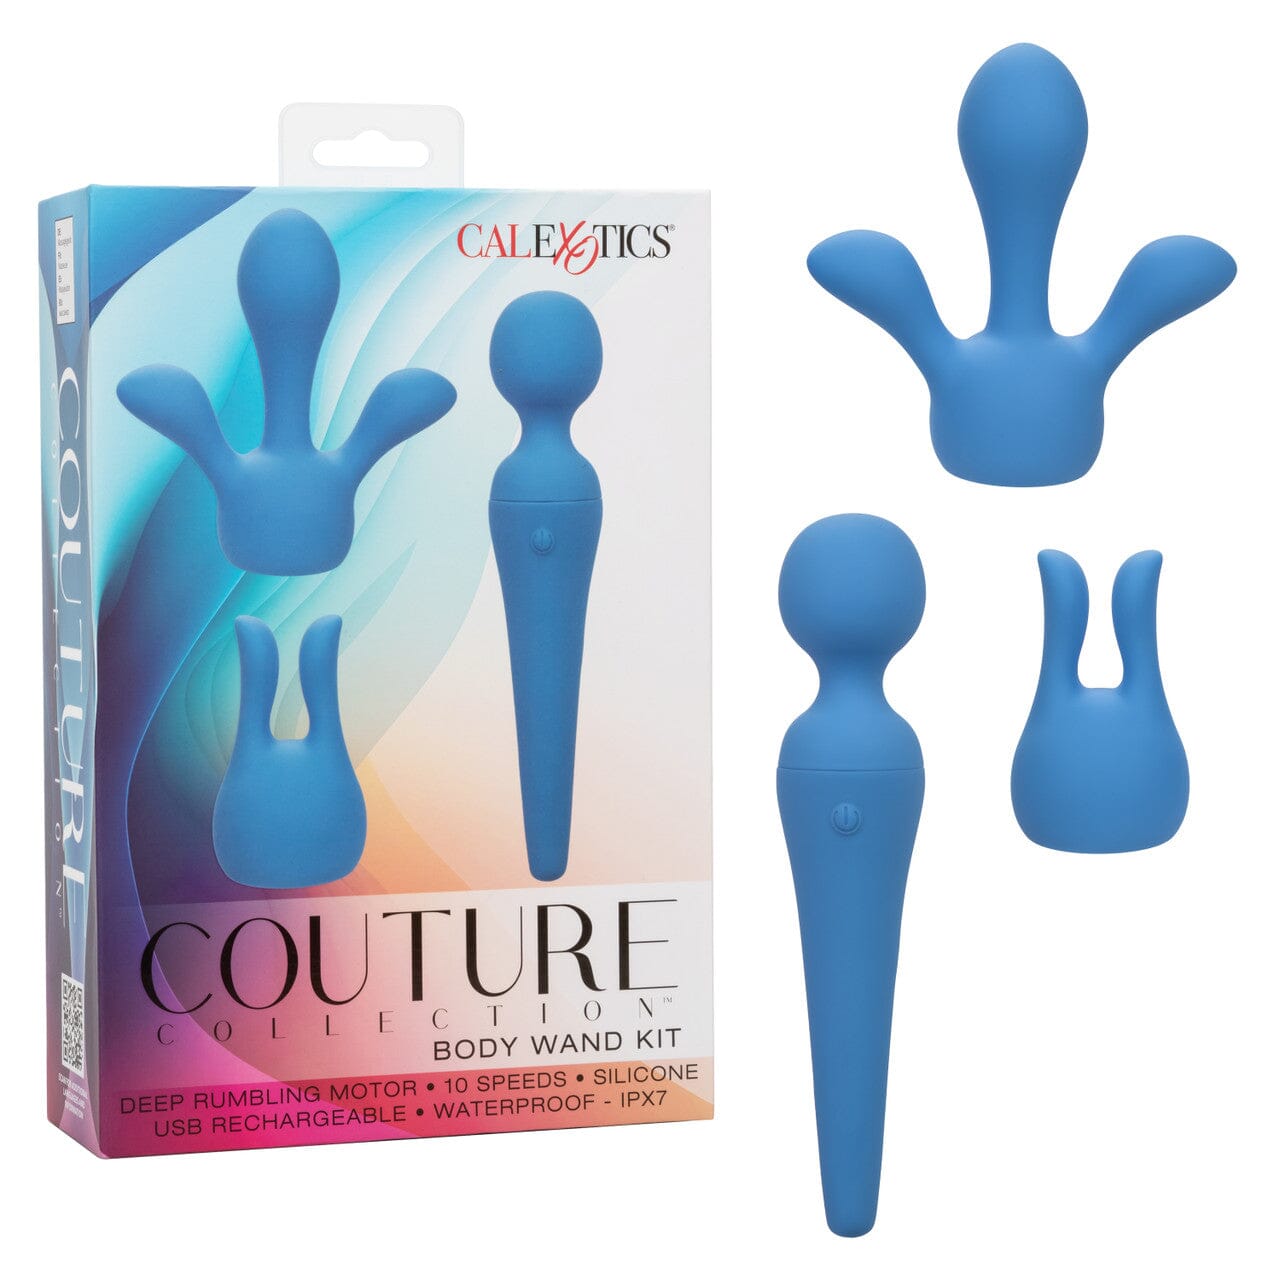 Couture Collection Body Wand Kit - Hamilton Park Electronics